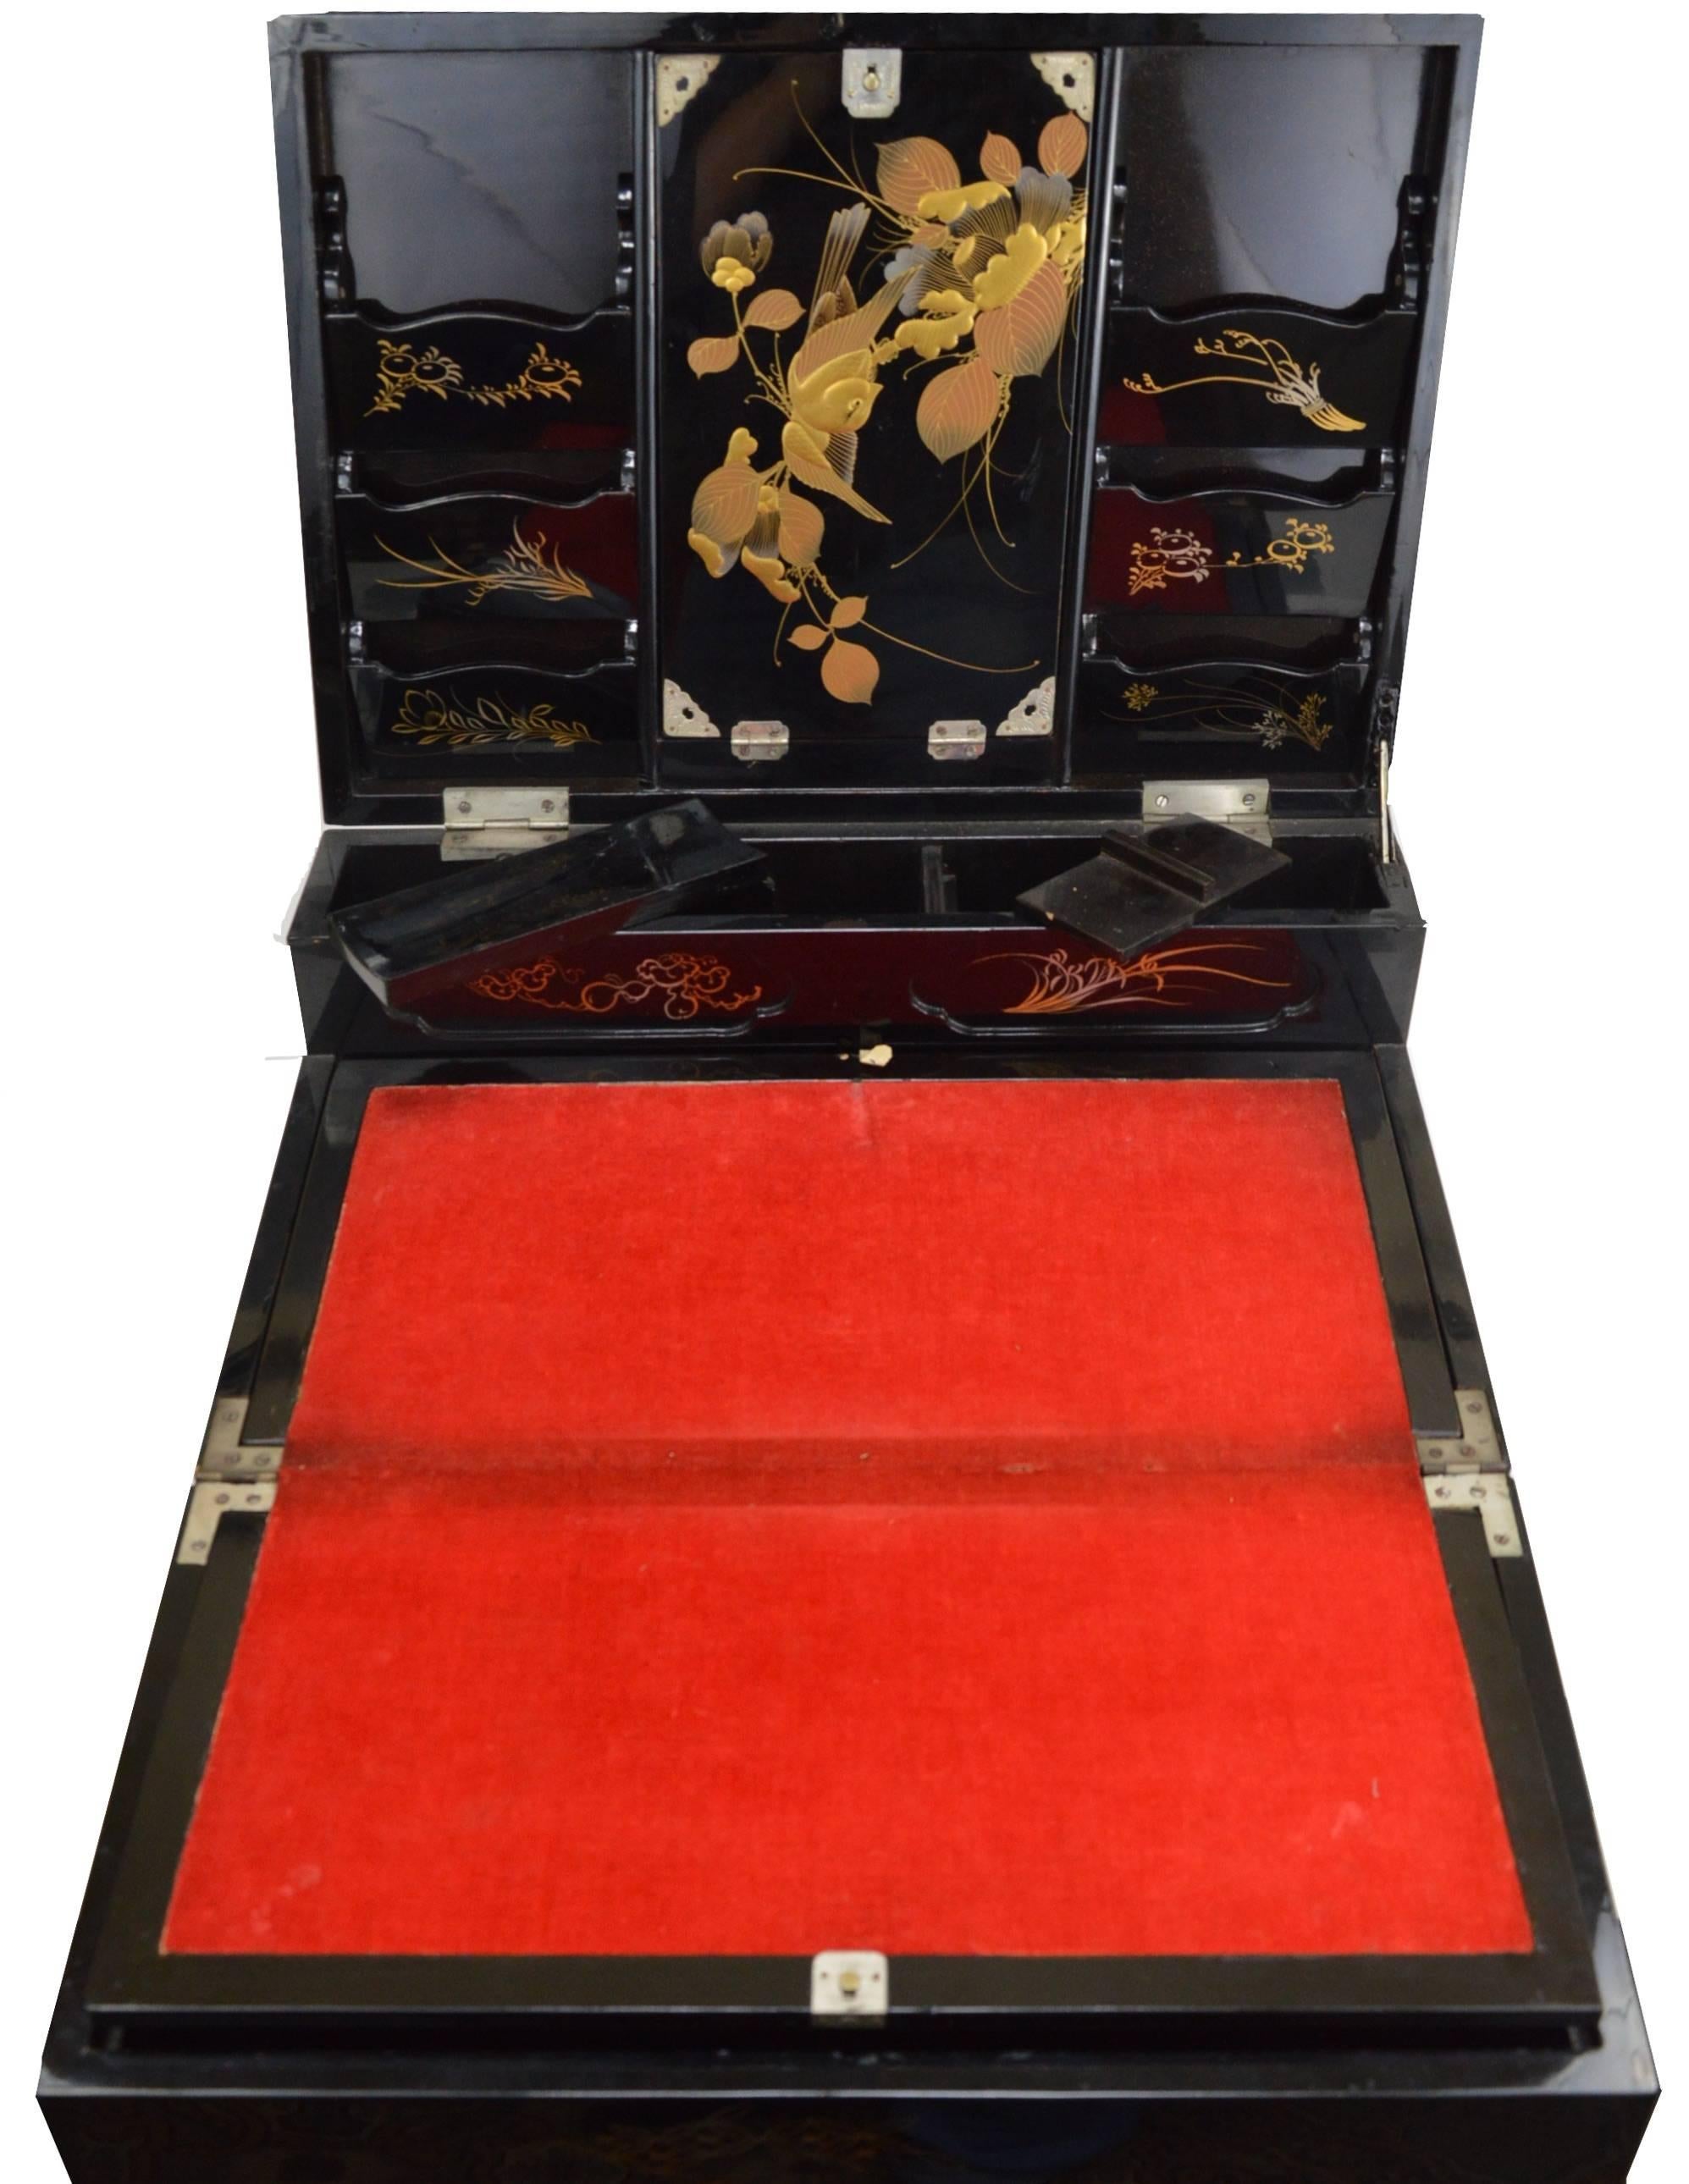 Takamaki style Japanese lacquer wood writing cabinet.
Dimensions: 47 x 31 x 20 cm.
Condition report: Good condition, one of the fabric loops holding the desk needs to be changed (see the photos).